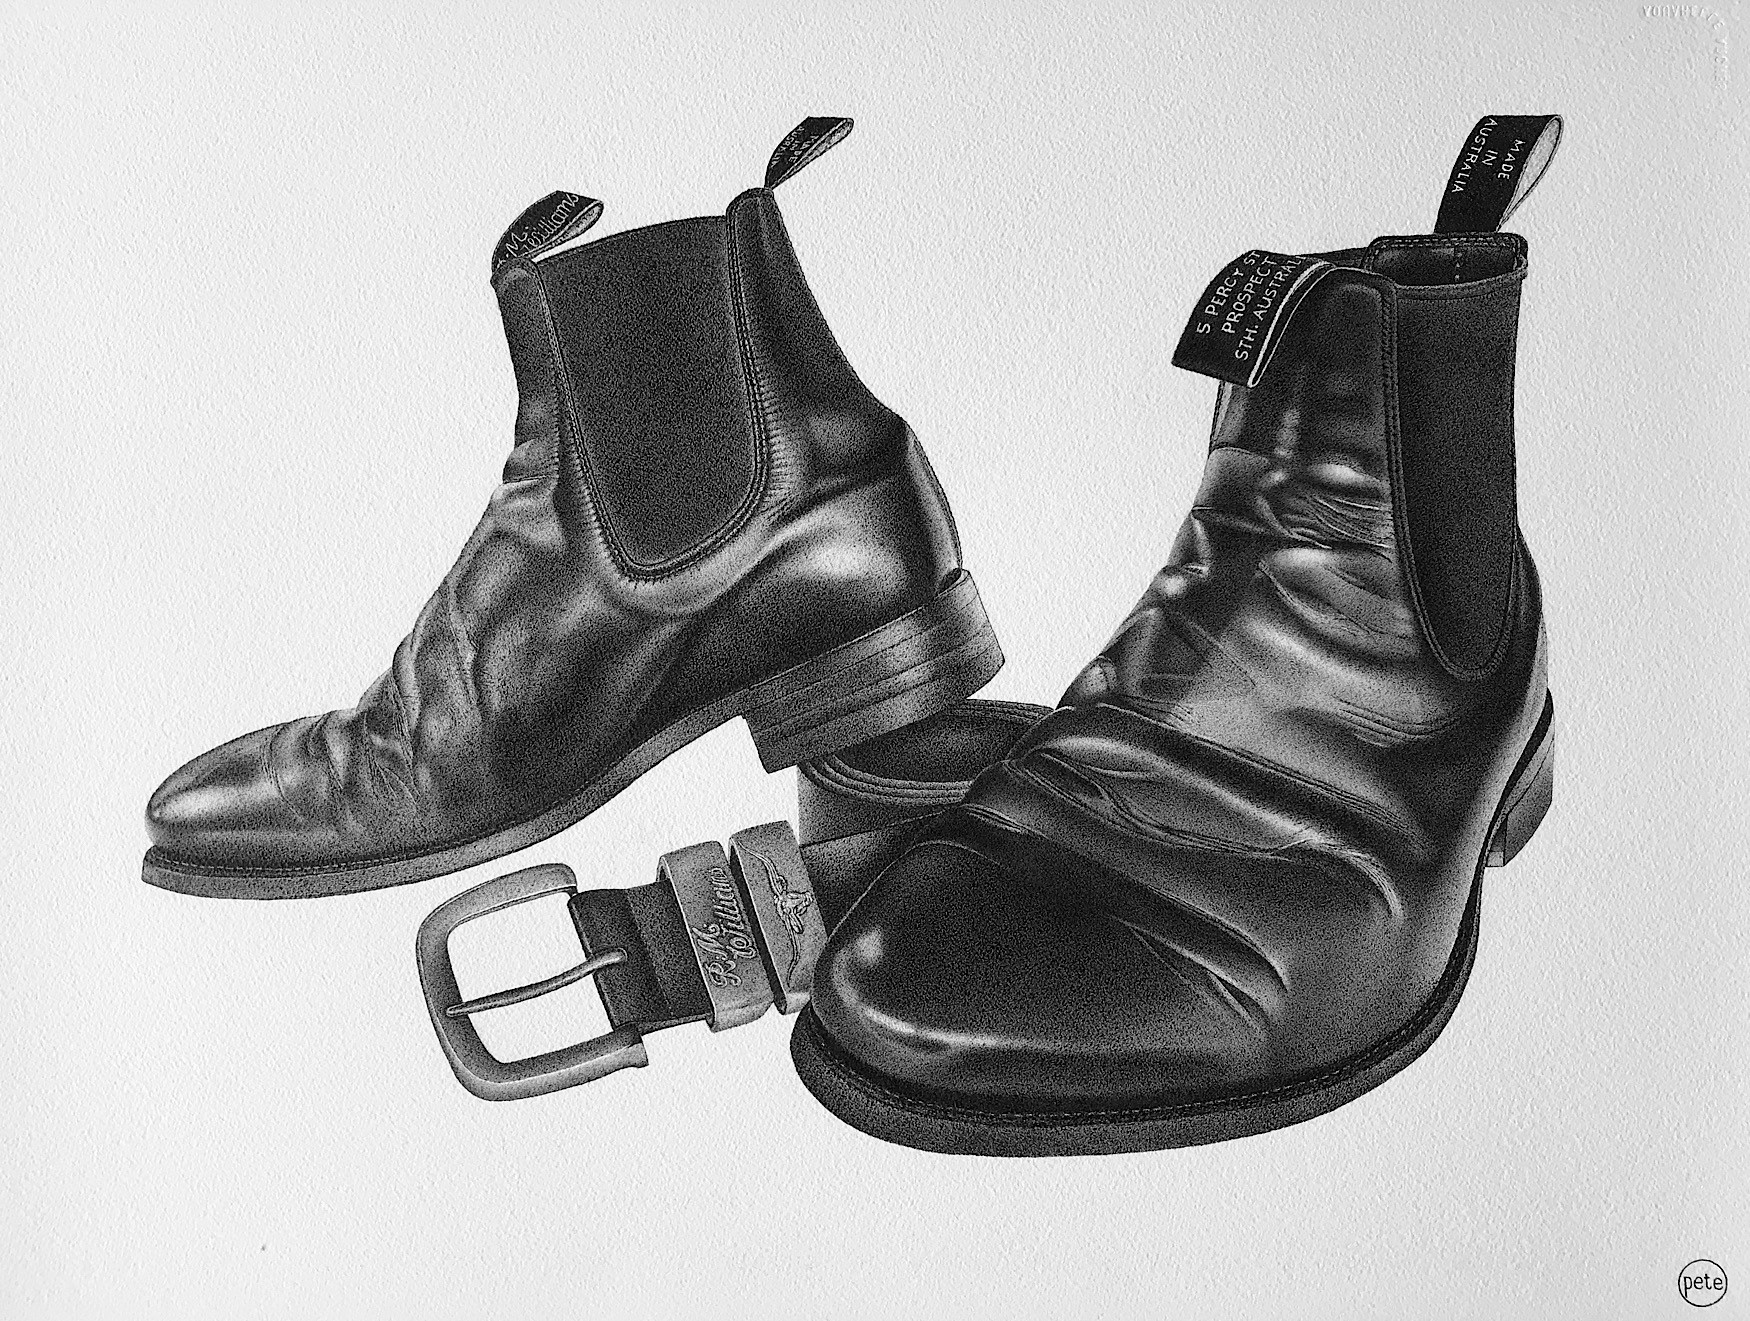 My RM Williams Boots by Peter Price | Clayton Utz Art Award 2020 Finalists | Lethbridge Gallery